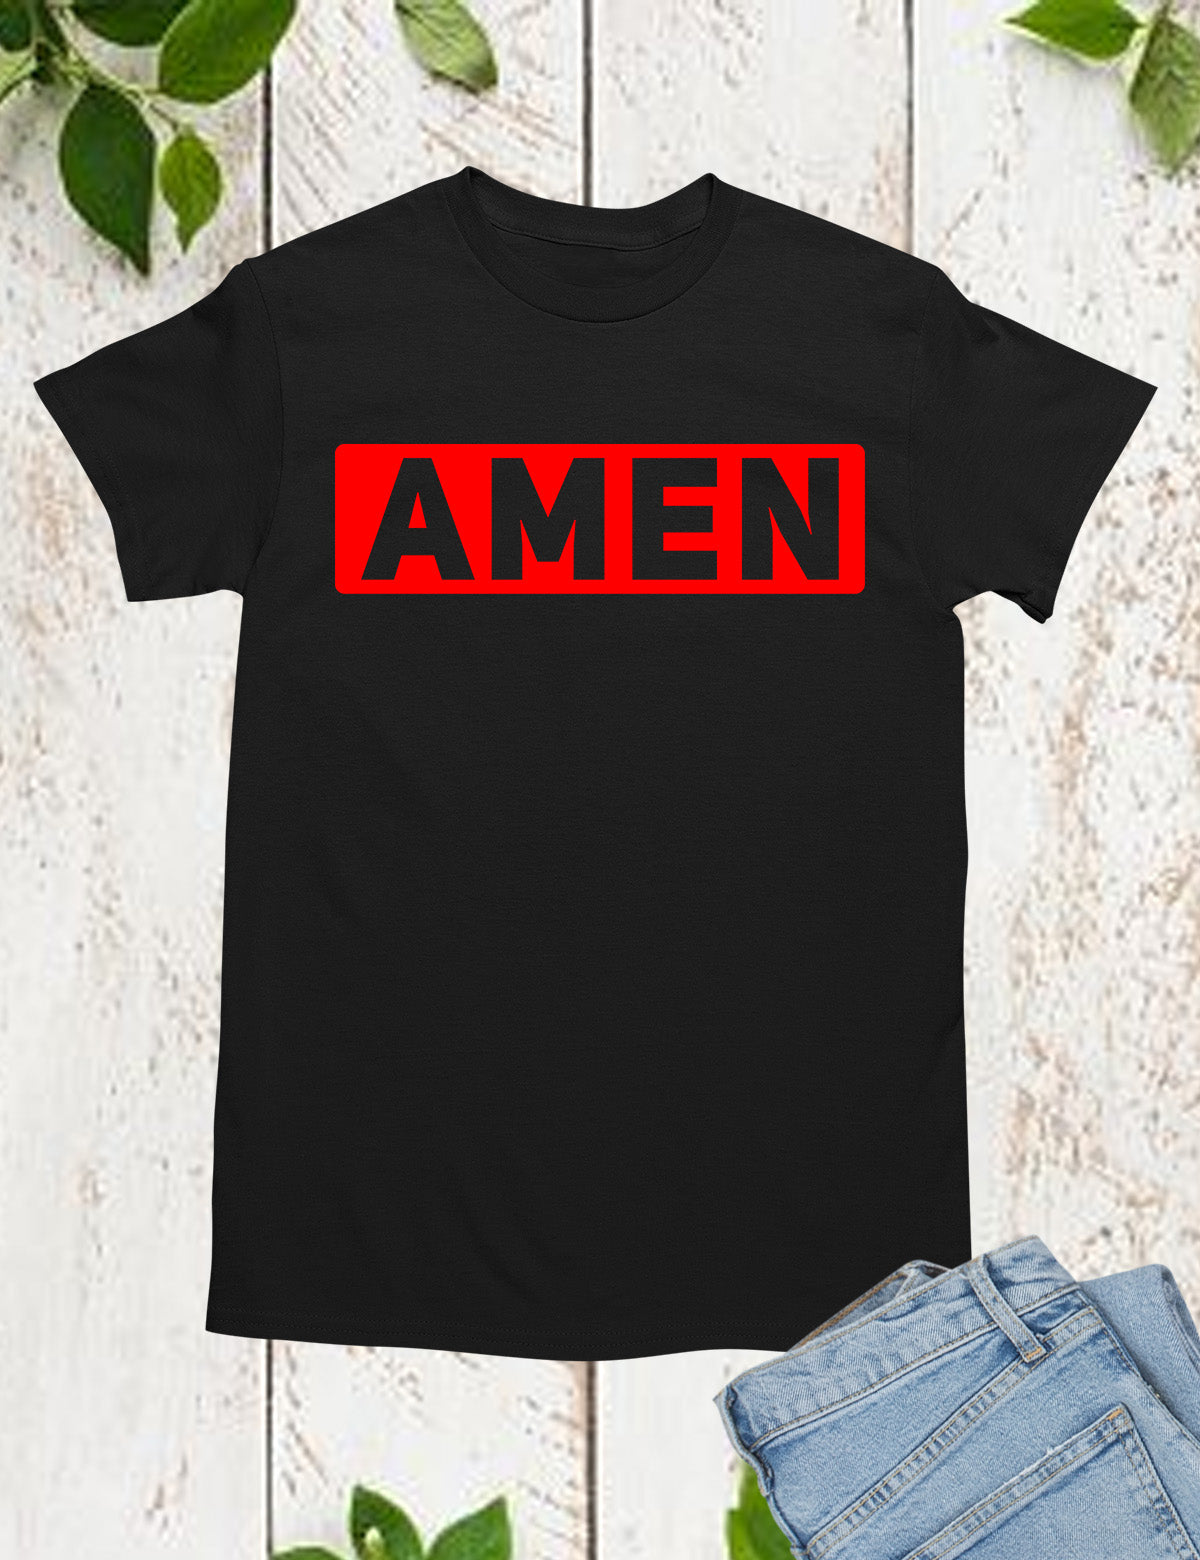 AMEN Religious Tees Let God's will Be Done